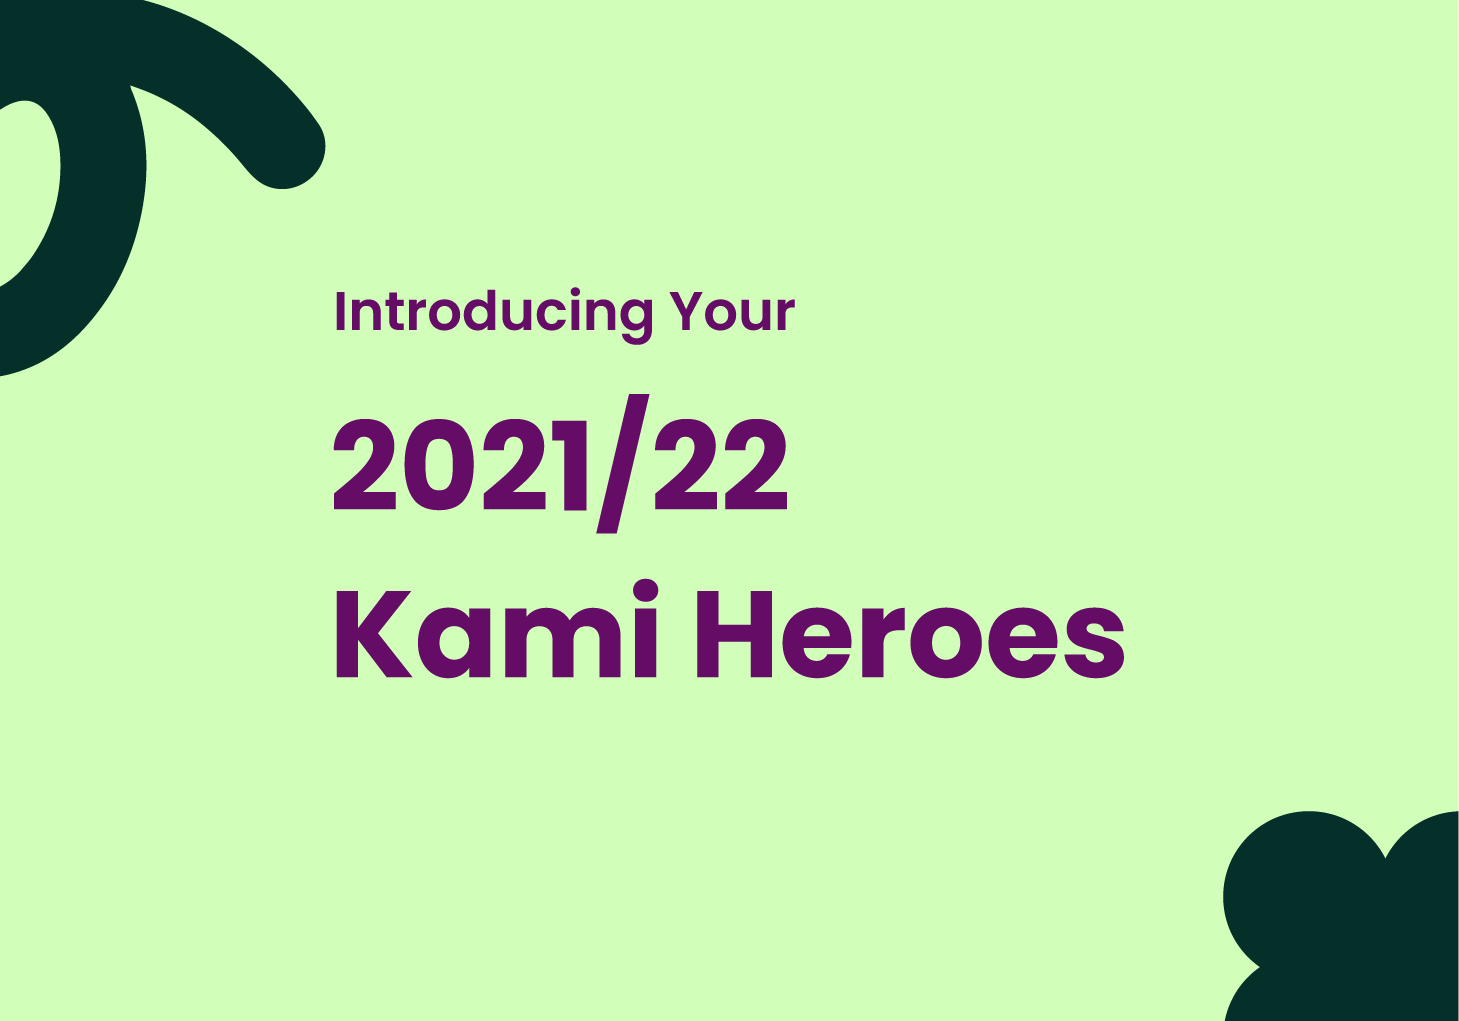 Introducing Your 2021/22 Kami Heroes